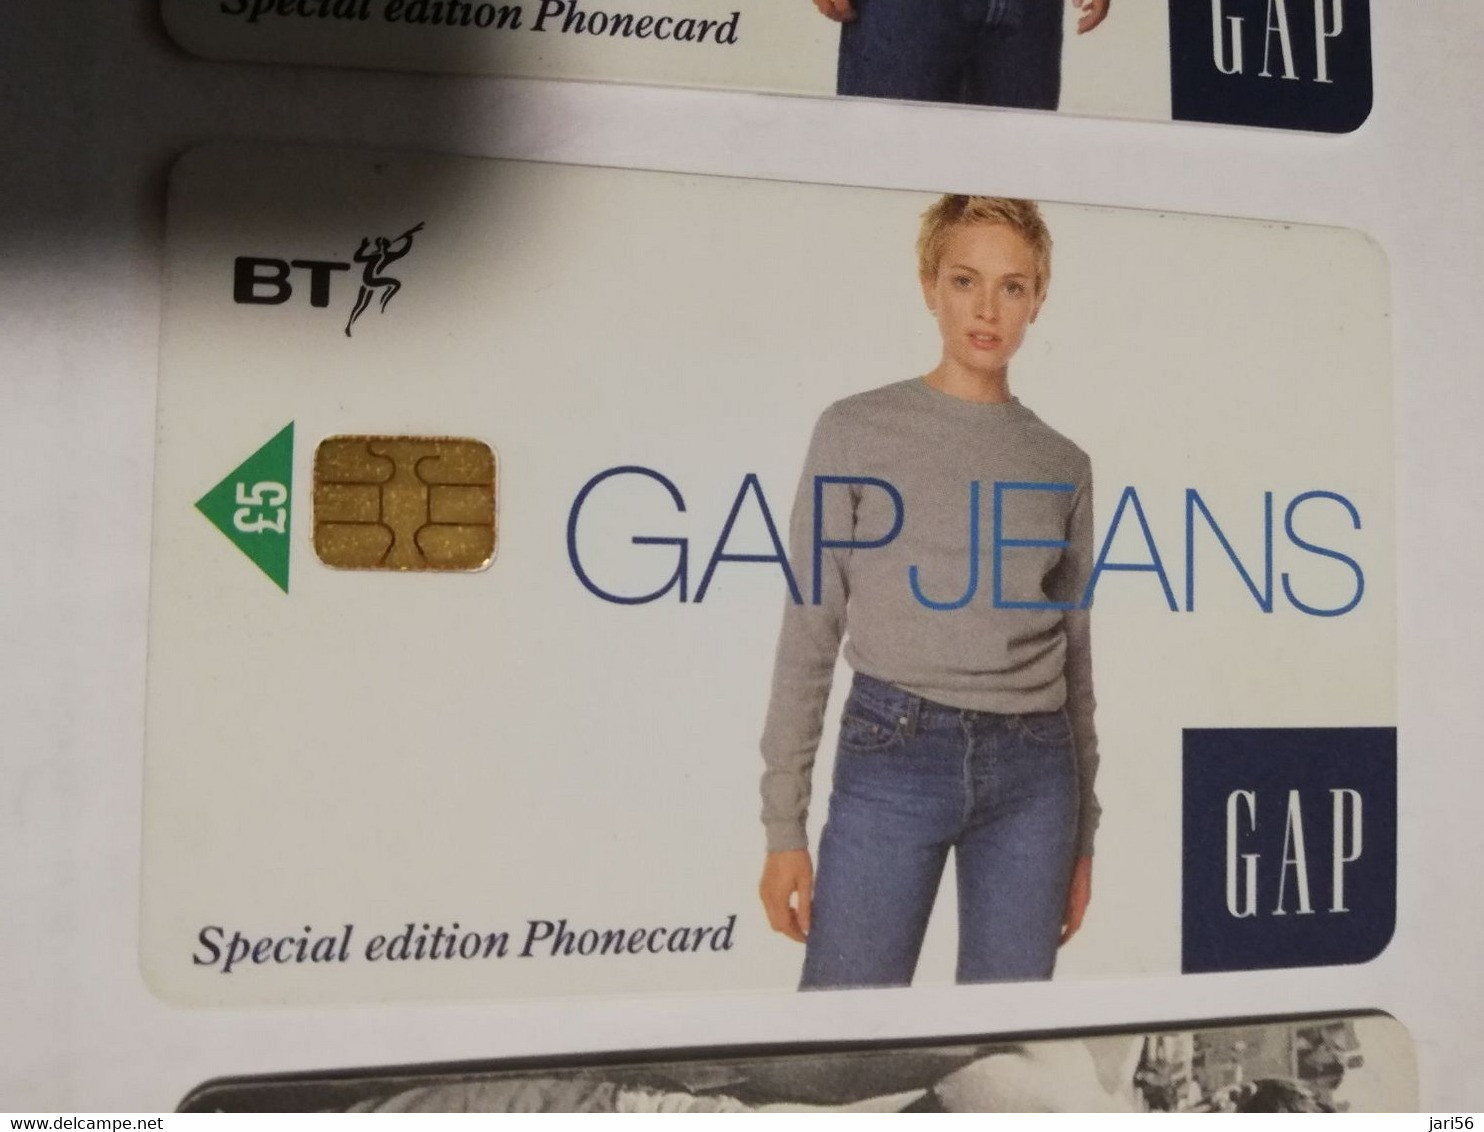 GREAT BRETAGNE 1x 5 POUND 2X 10 POUND  GAP JEANS   SPECIAL EDITION   PERFECT  CONDITION     **4824**